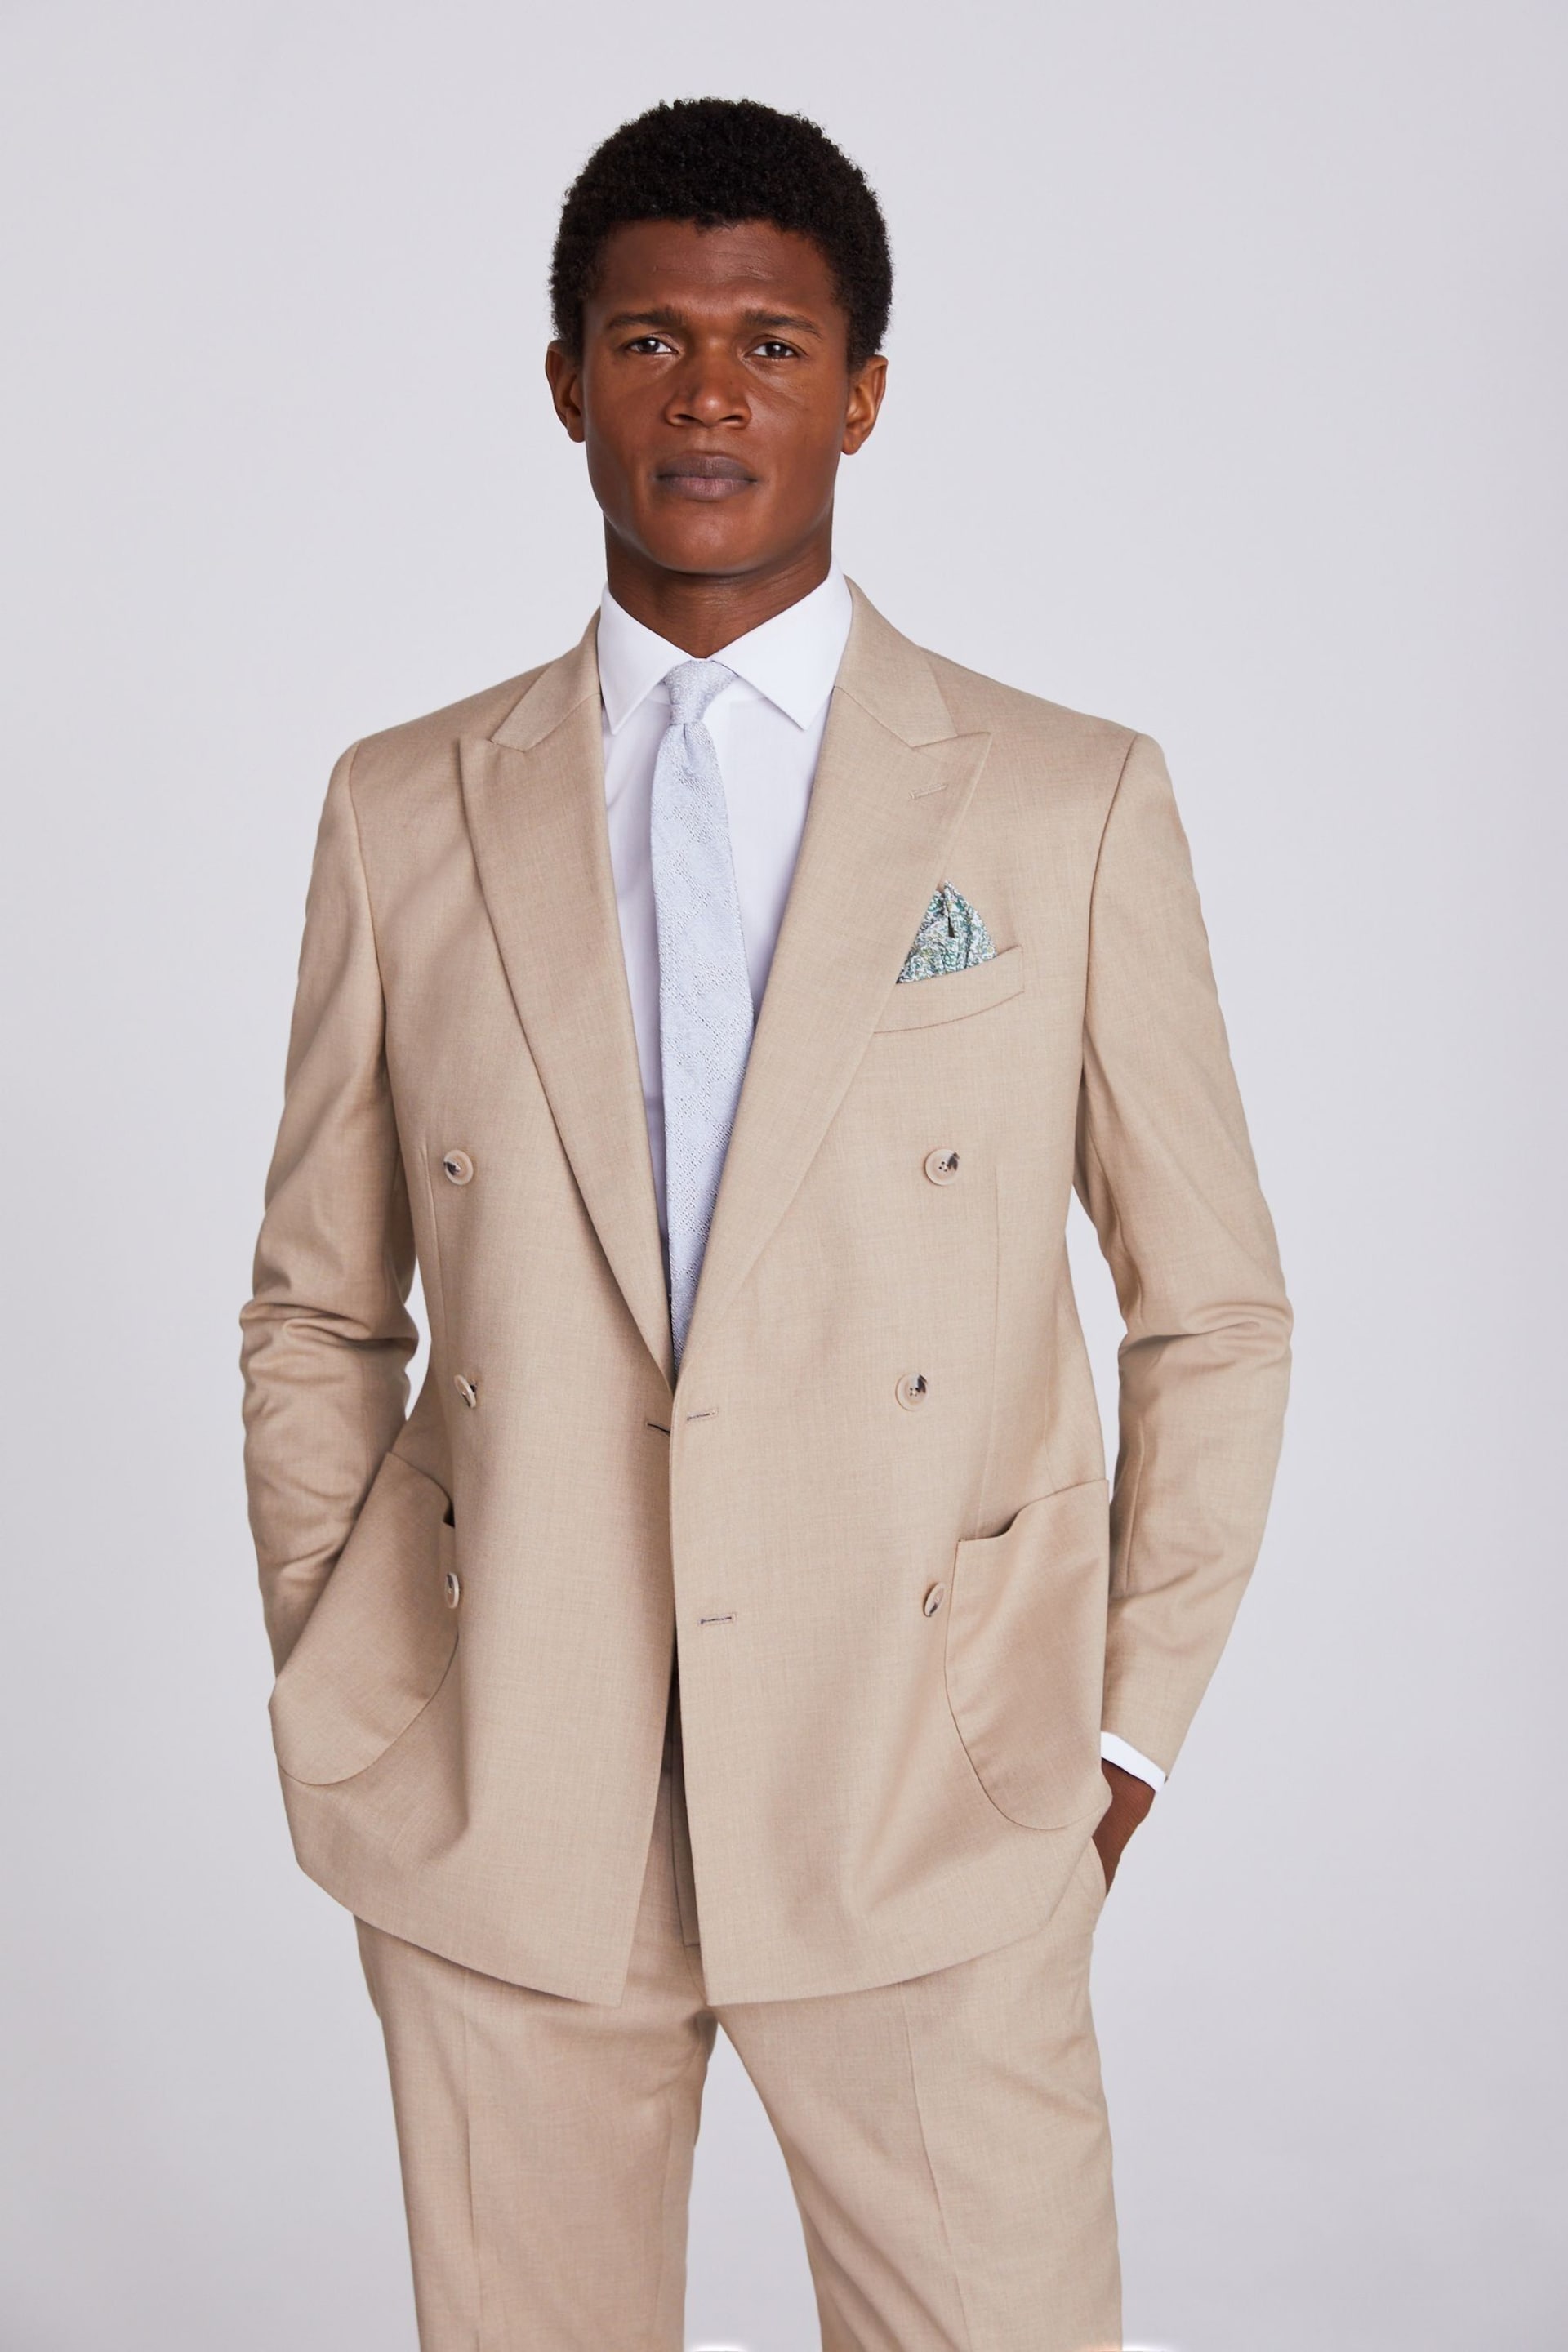 MOSS Tailored Fit Blonde Brown Jacket - Image 1 of 4